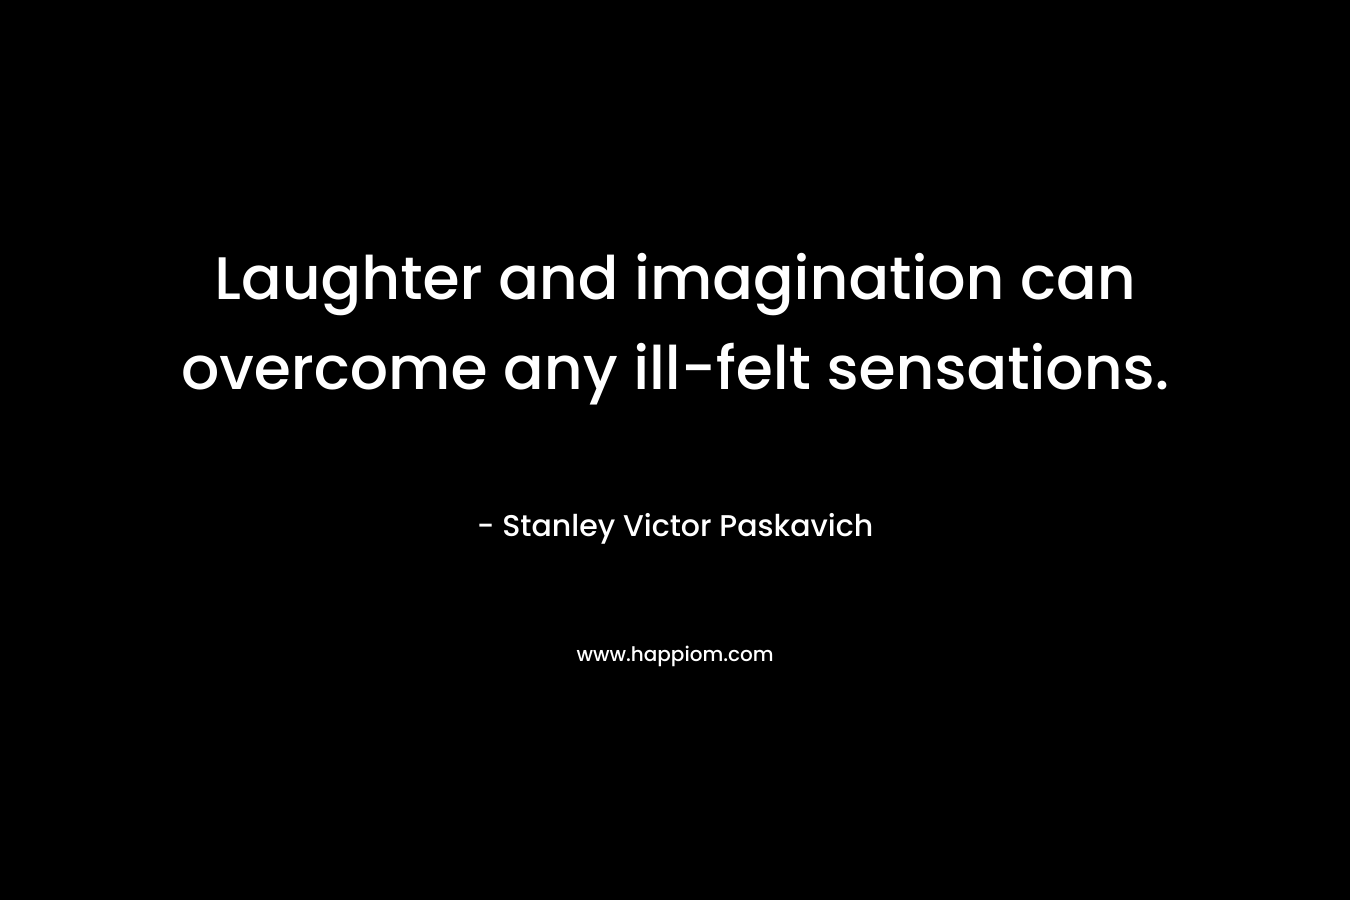 Laughter and imagination can overcome any ill-felt sensations. – Stanley Victor Paskavich